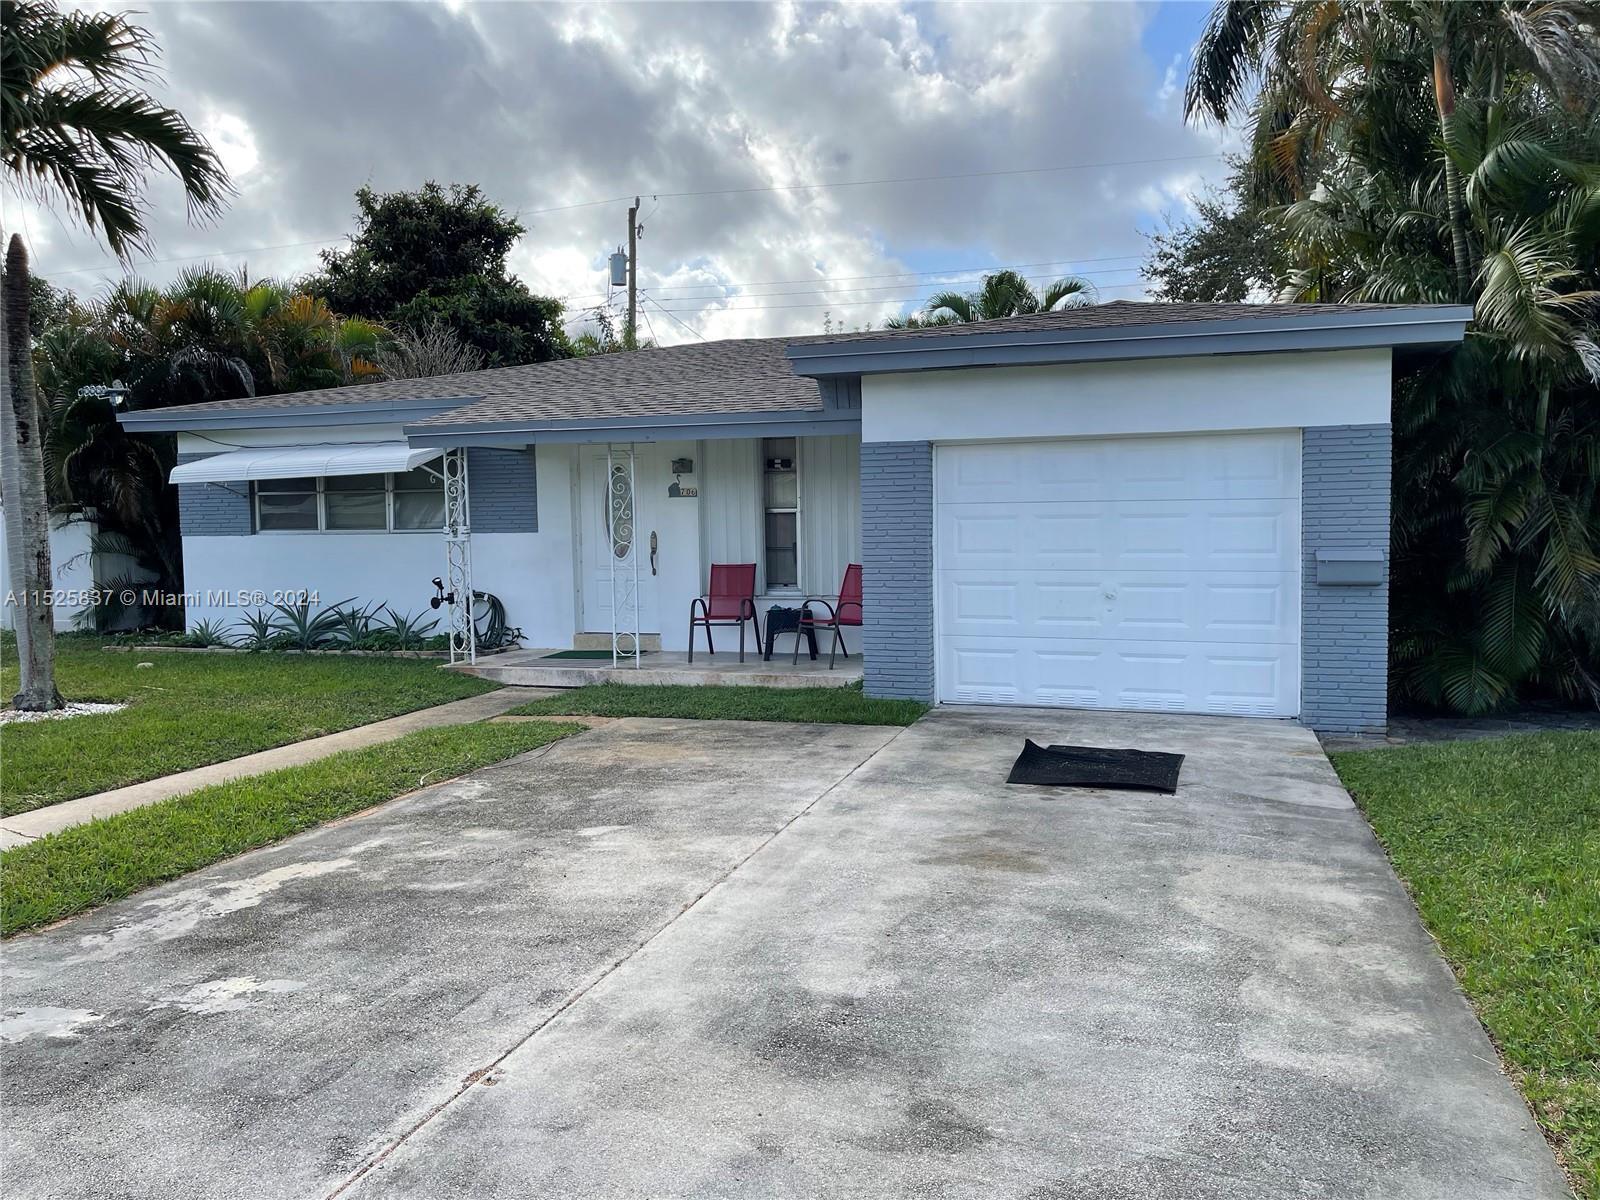 Photo of 706 N 32nd Ave in Hollywood, FL